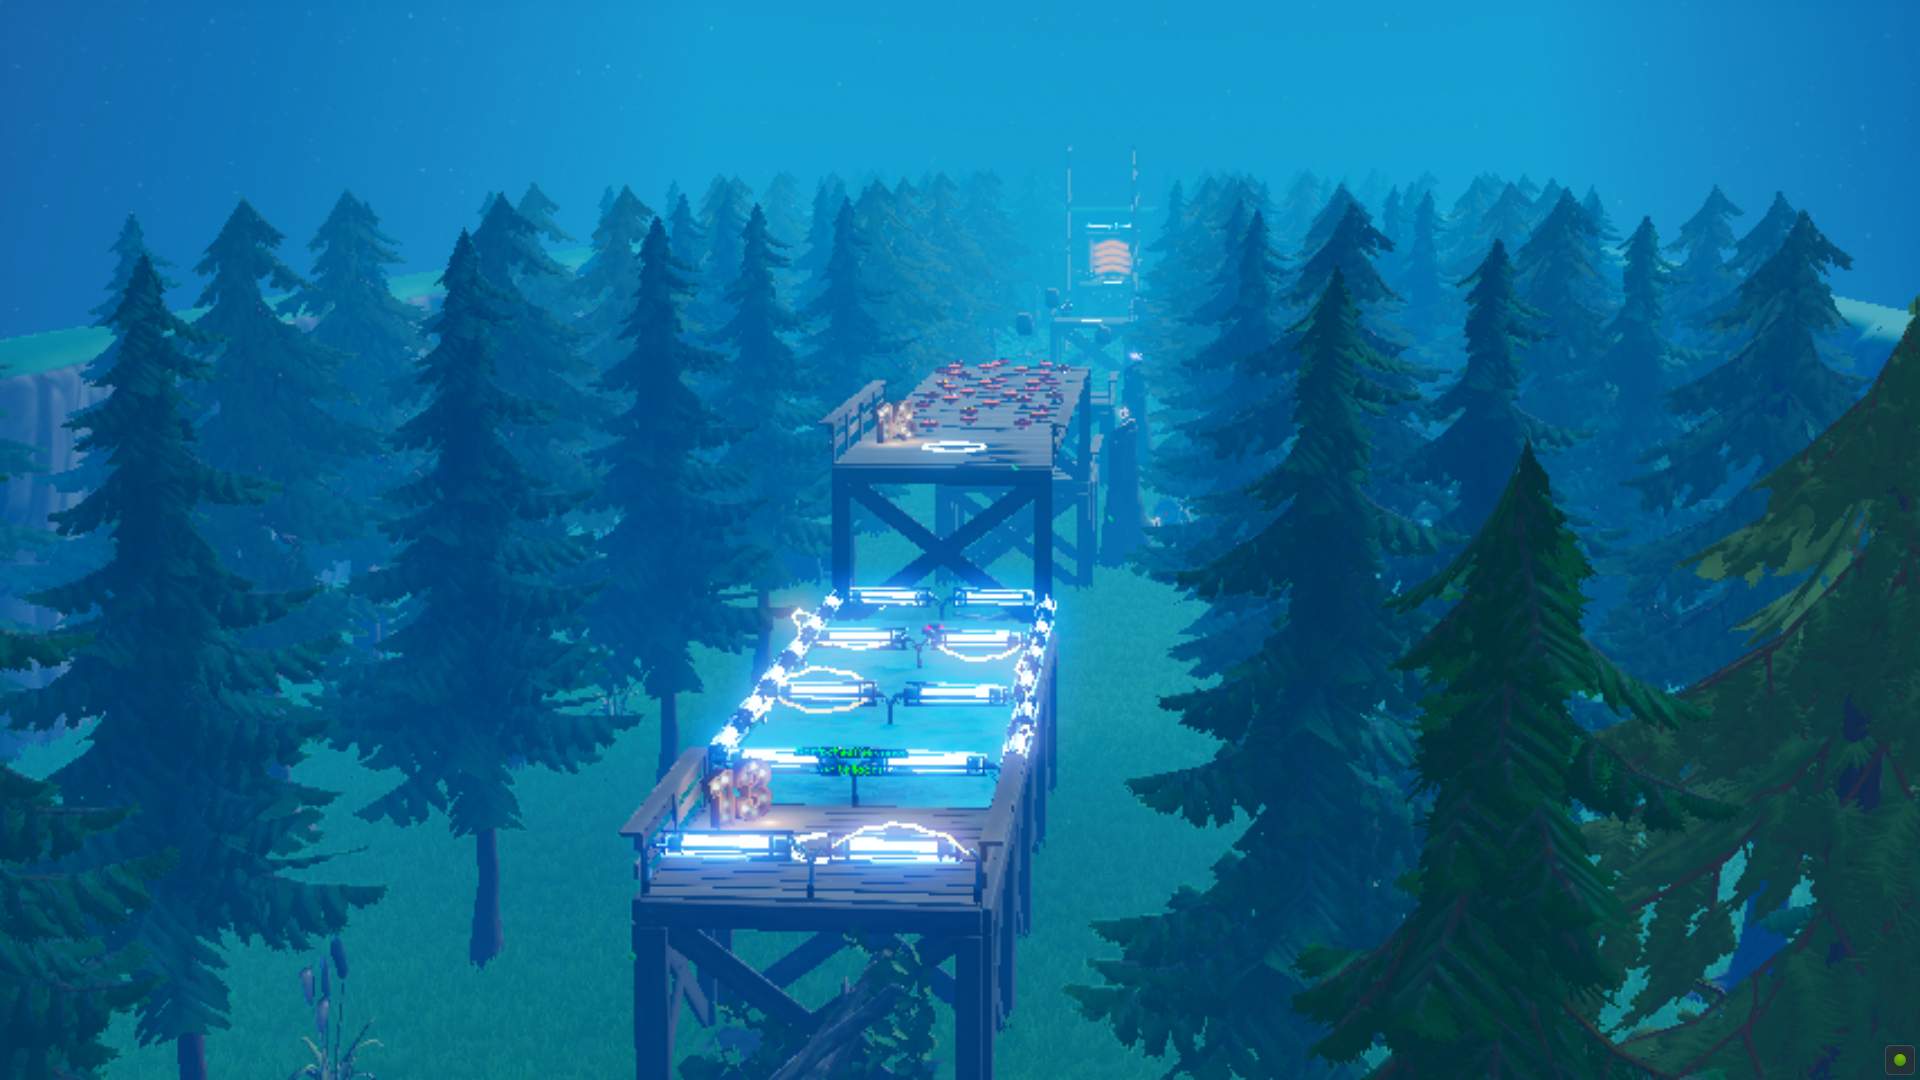 SPOOKY FOREST DEATHRUN image 2